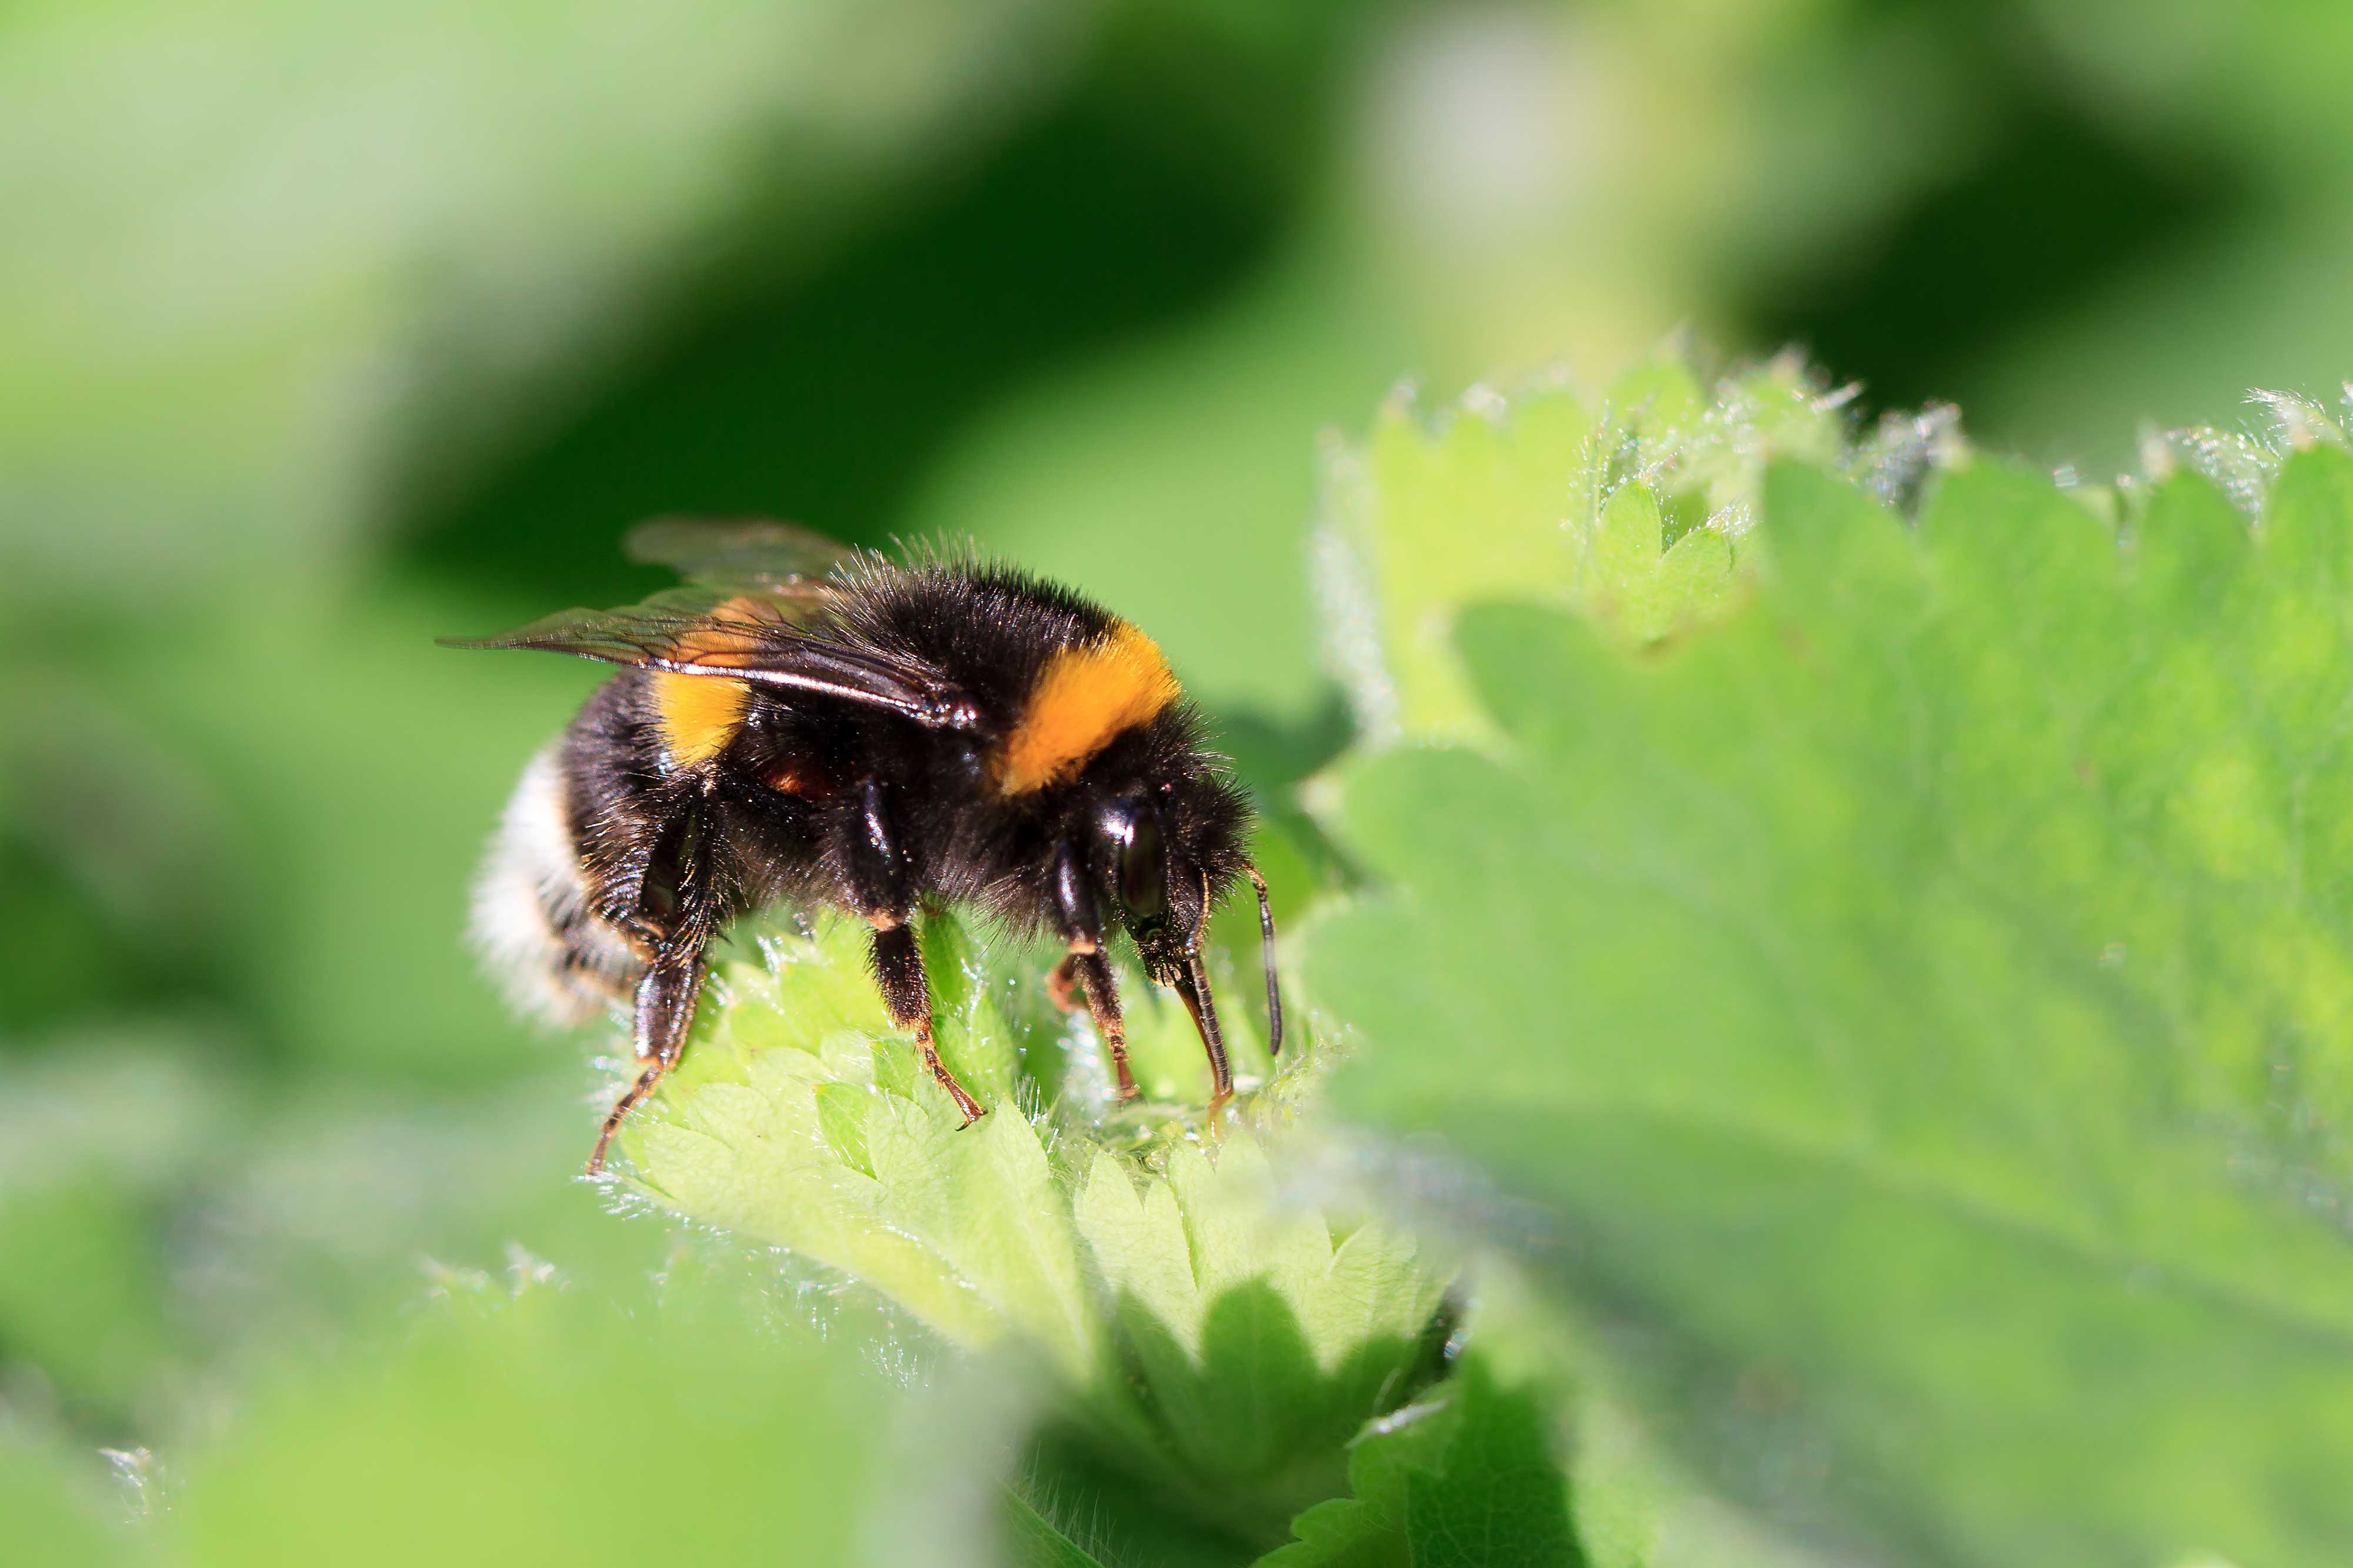 A bumble bee on a leaf.